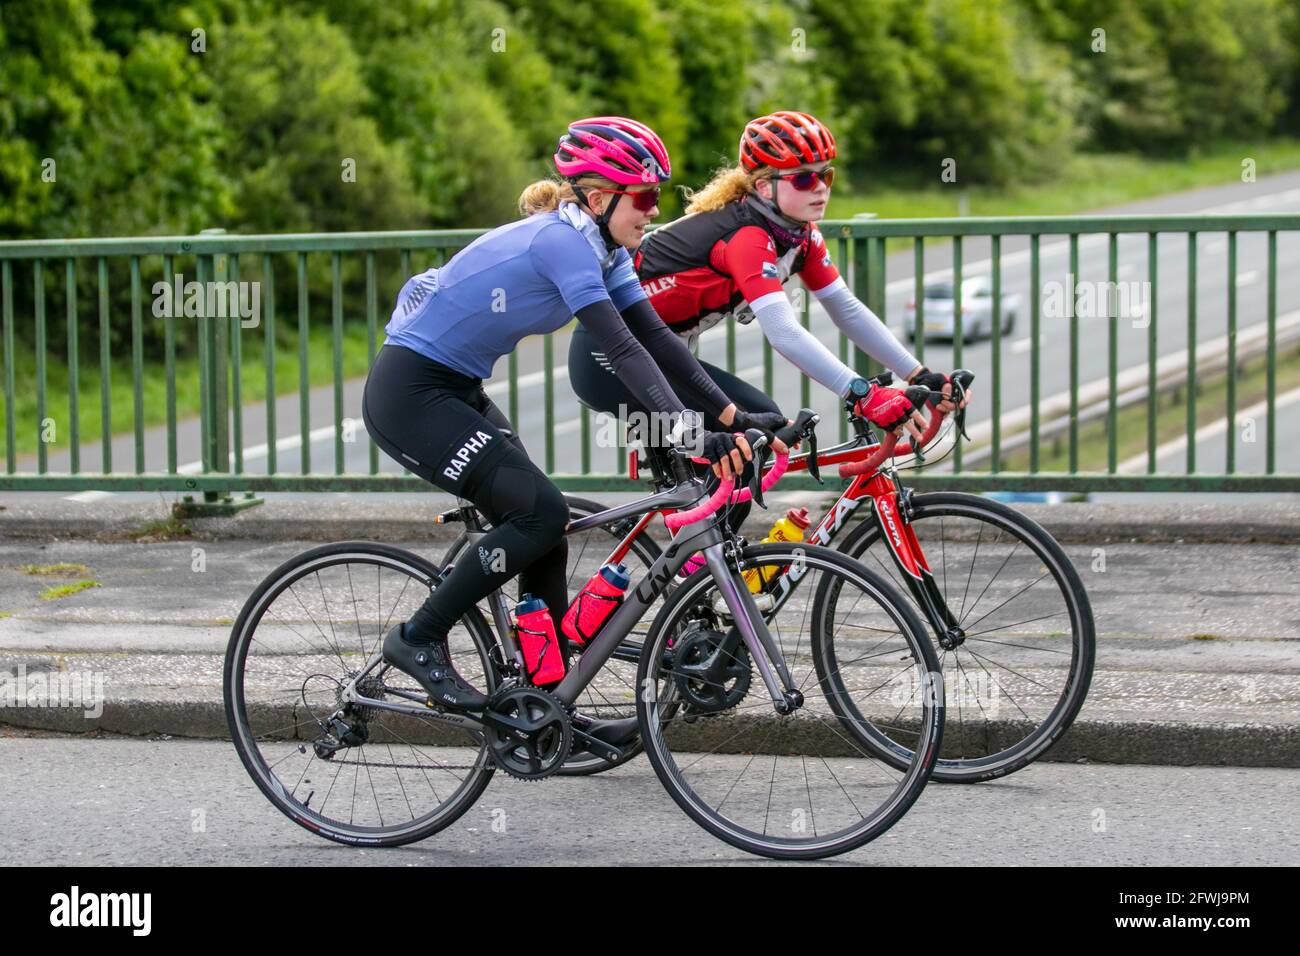 Two female cyclists riding LIV sports road bike wearing Rapha clothing, on countryside route crossing motorway bridge in rural Lancashire, UK Stock Photo